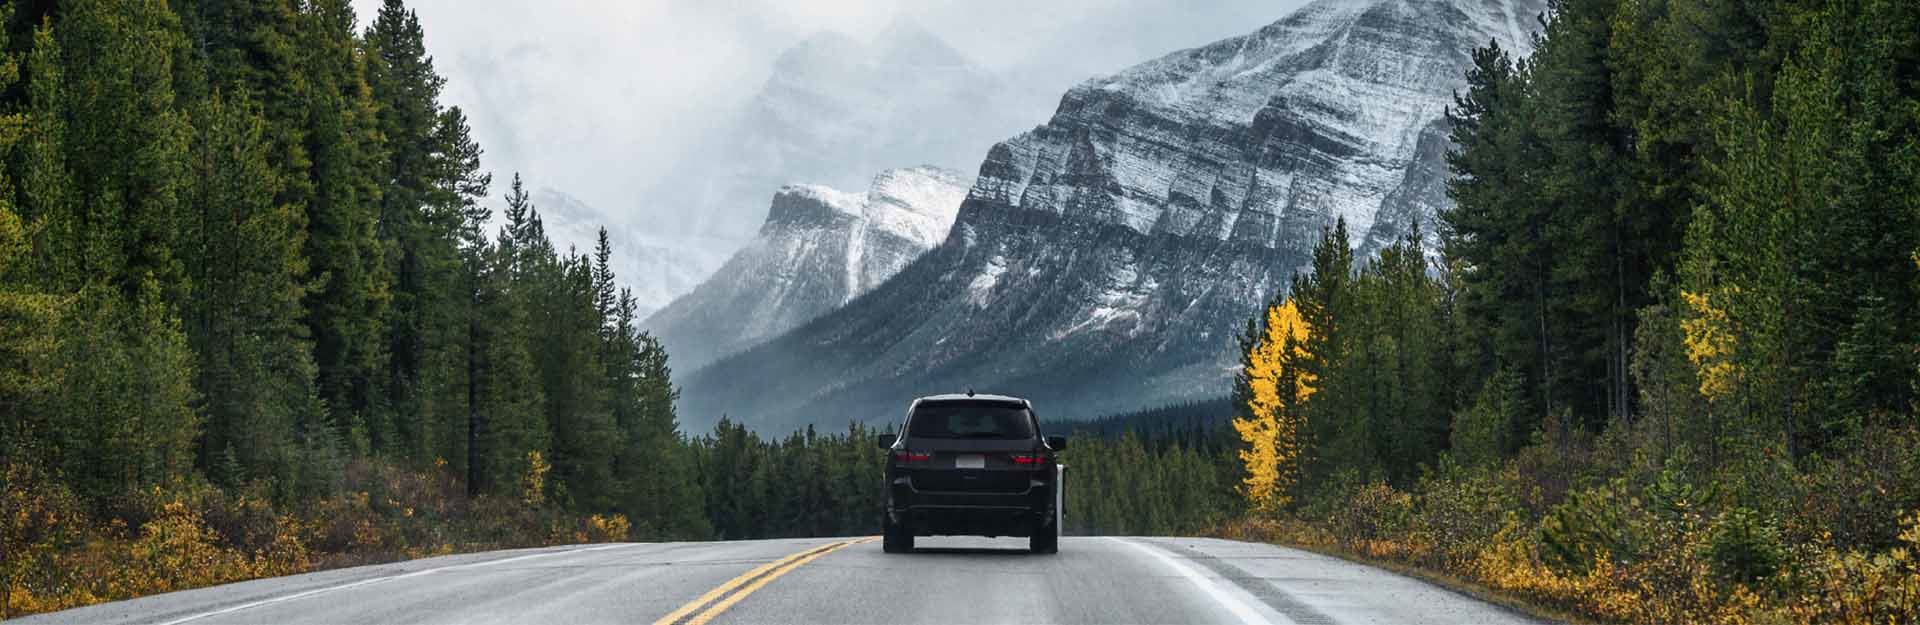 In the center, the rear part of an SUV-type vehicle traveling along a road. It is flanked, on the roadsides, by abundant vegetation of tall, slender trees. In the background, there are some mountains.